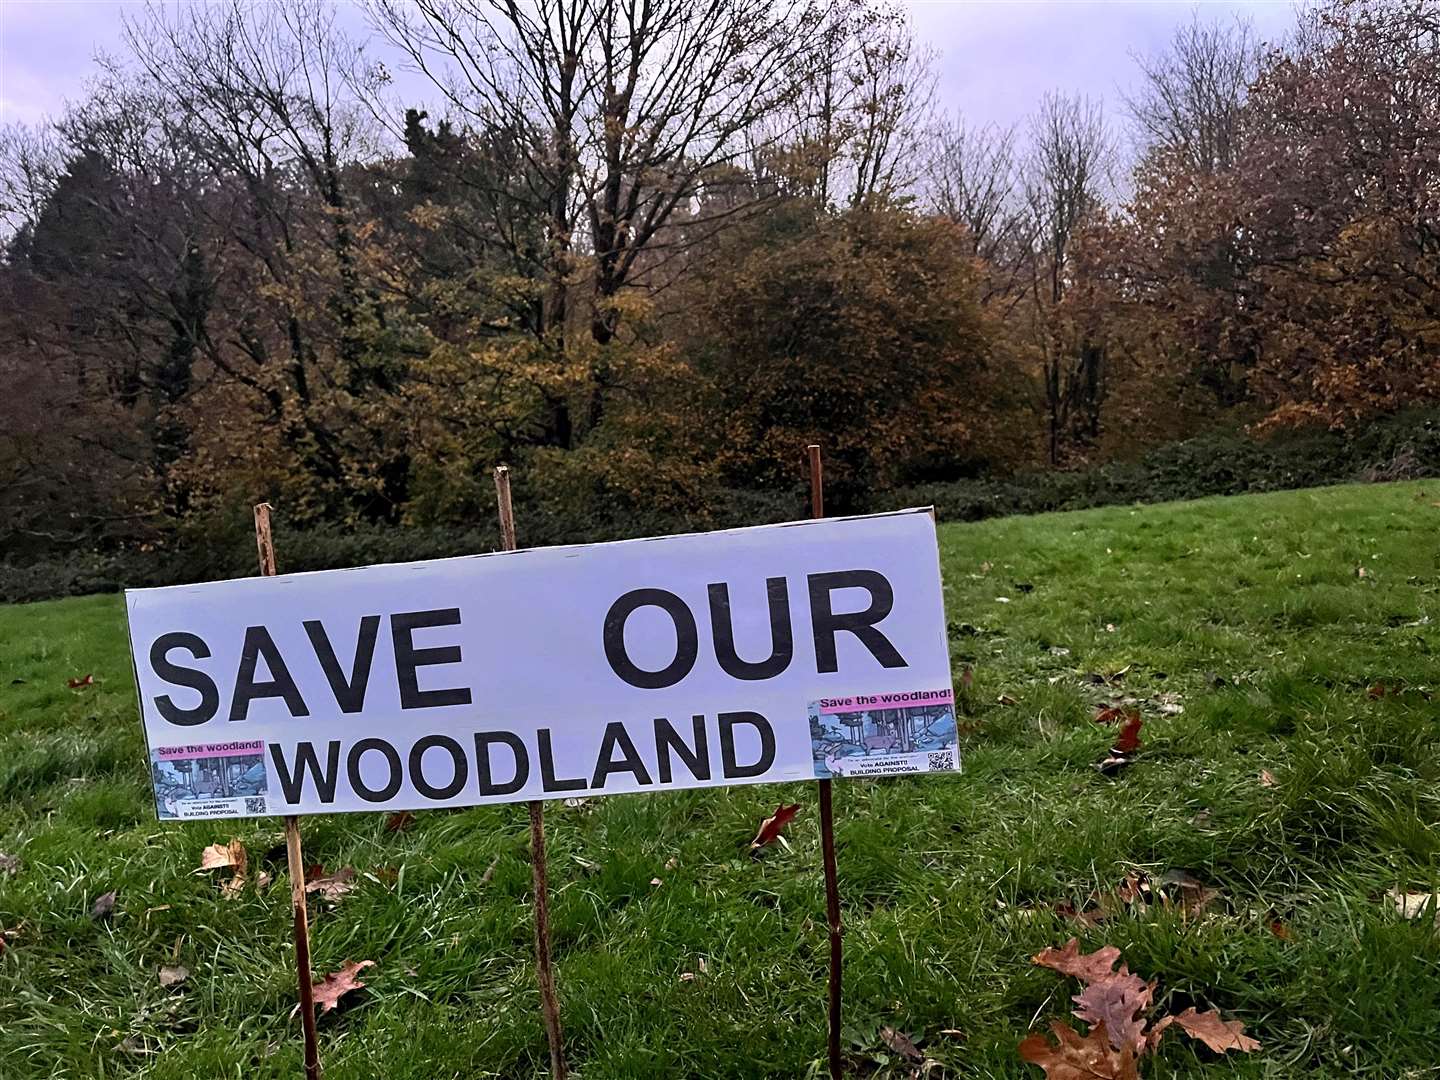 Residents are keen for the woodland, which is full of animals, to be preserved for future generations